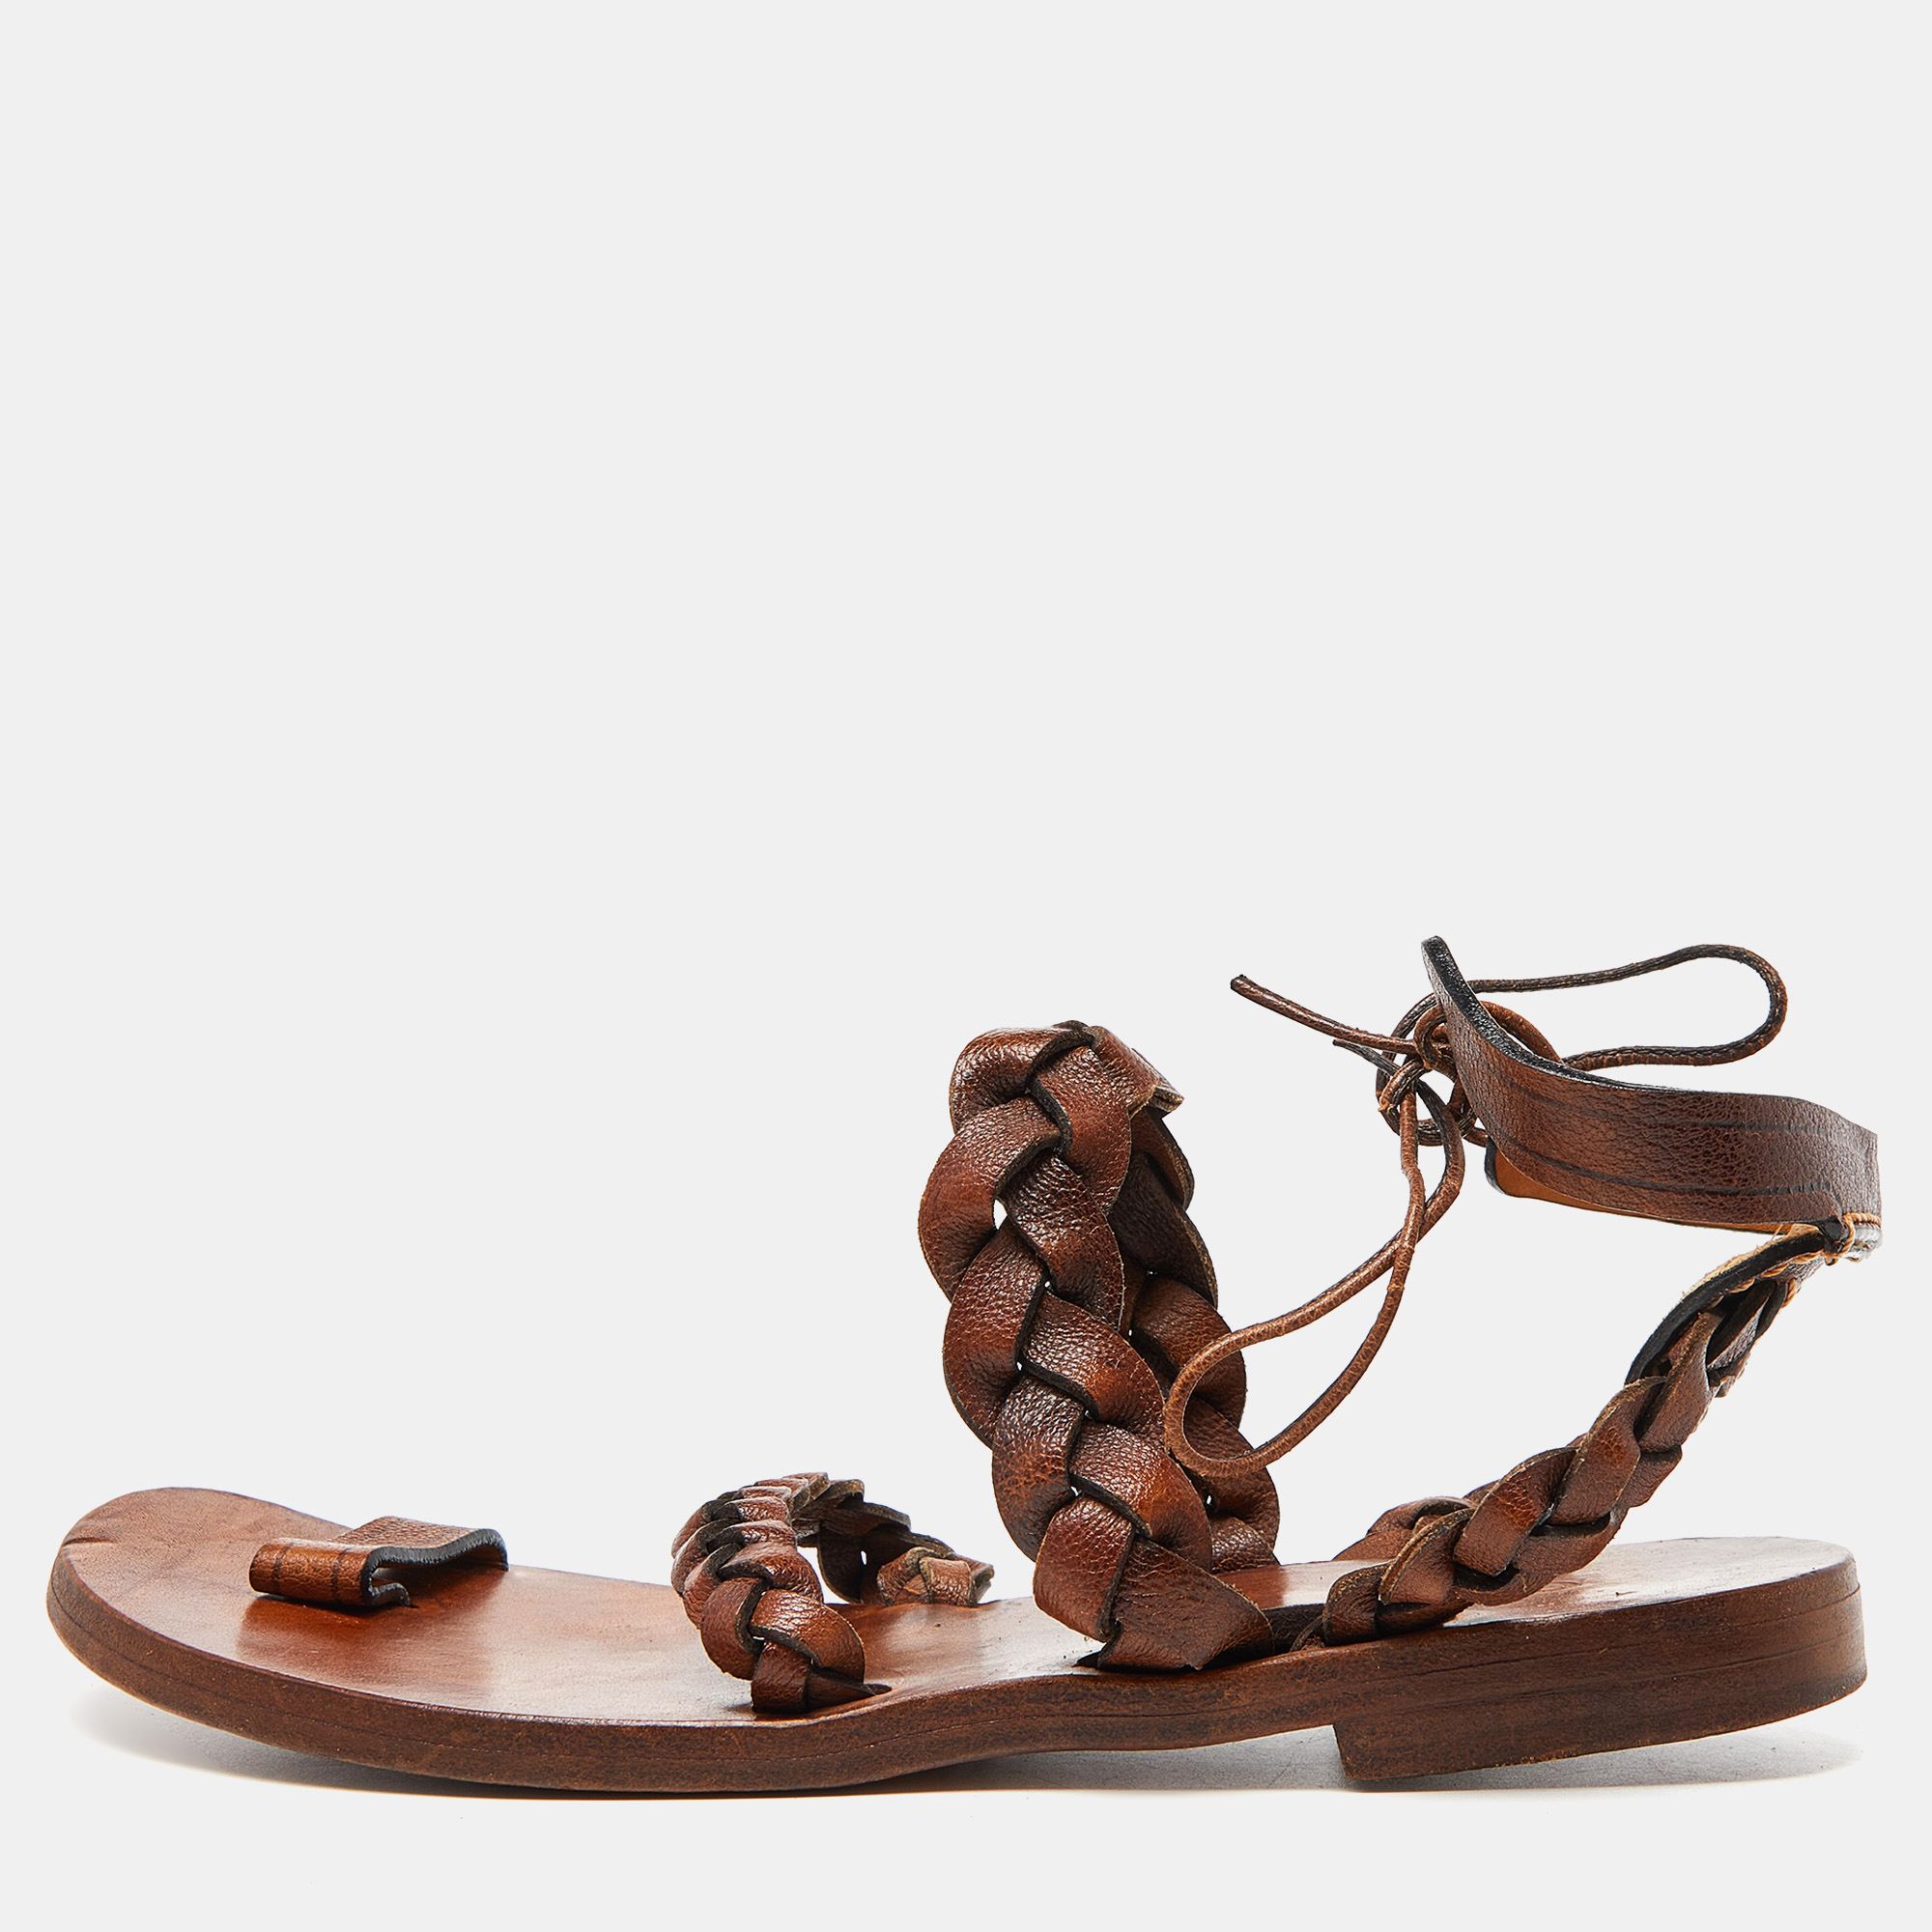 Chloe Brown Braided Leather Ankle Tie Flat Sandals Size 39